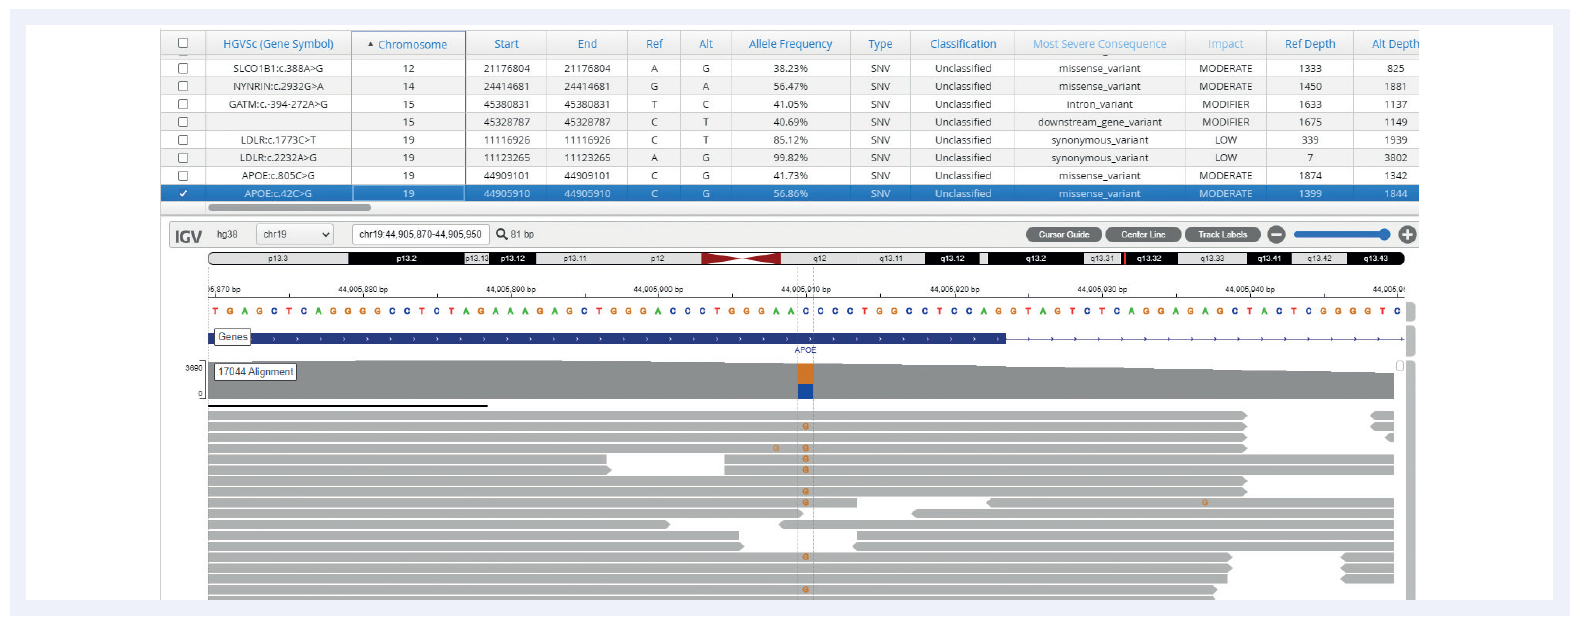 Figure 5: Missense variant on the APOB gene, as visualized by Interpret software.